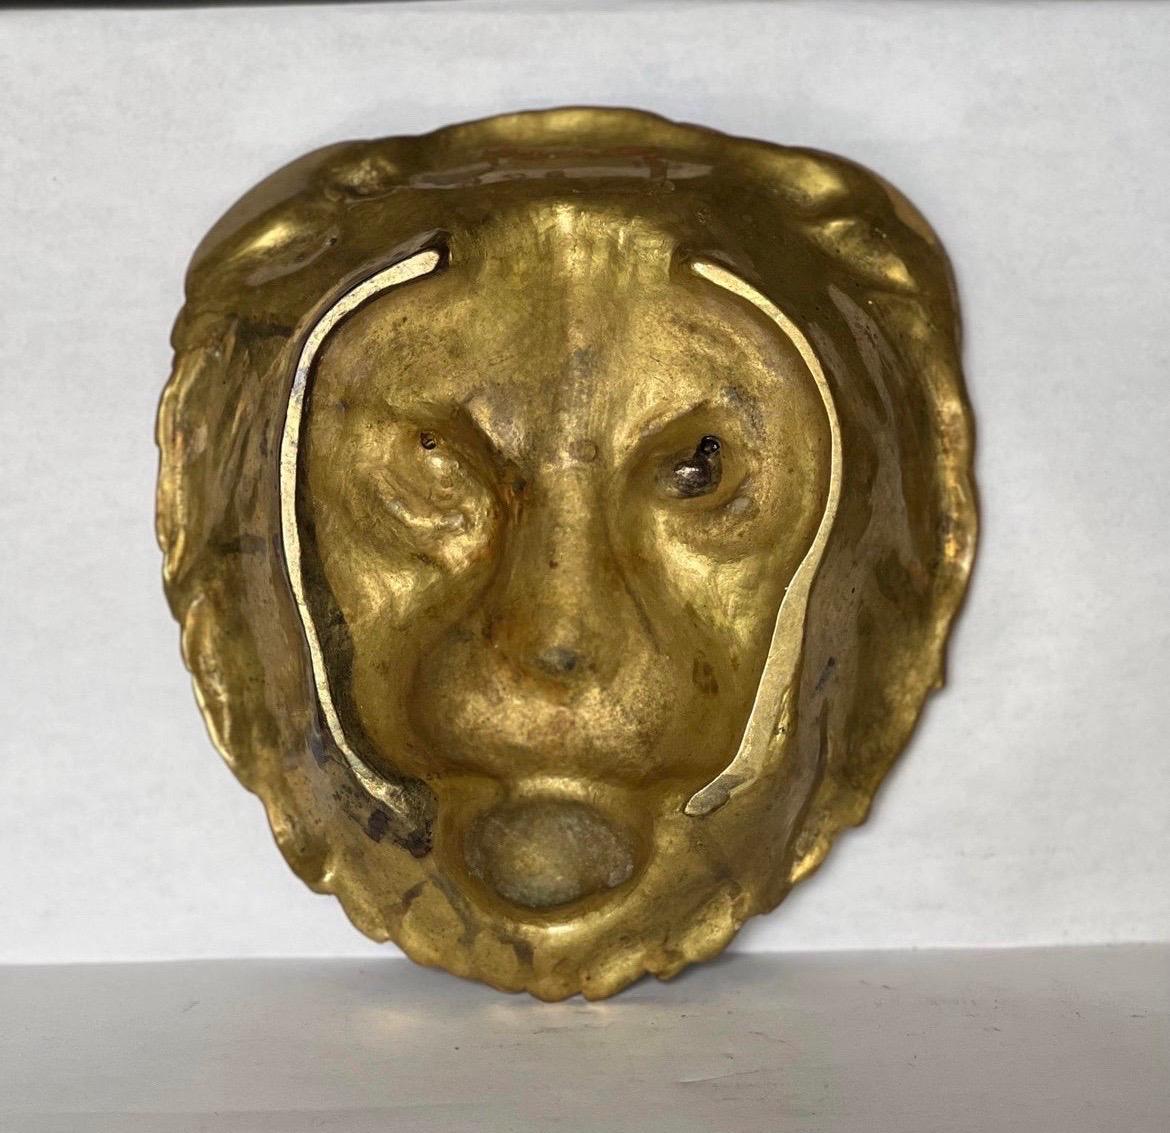 A very fine and rare french lion head form ashtray or catchall having glass eyes. Very unique piece with some wear and minor loss to verso - not observed when resting.